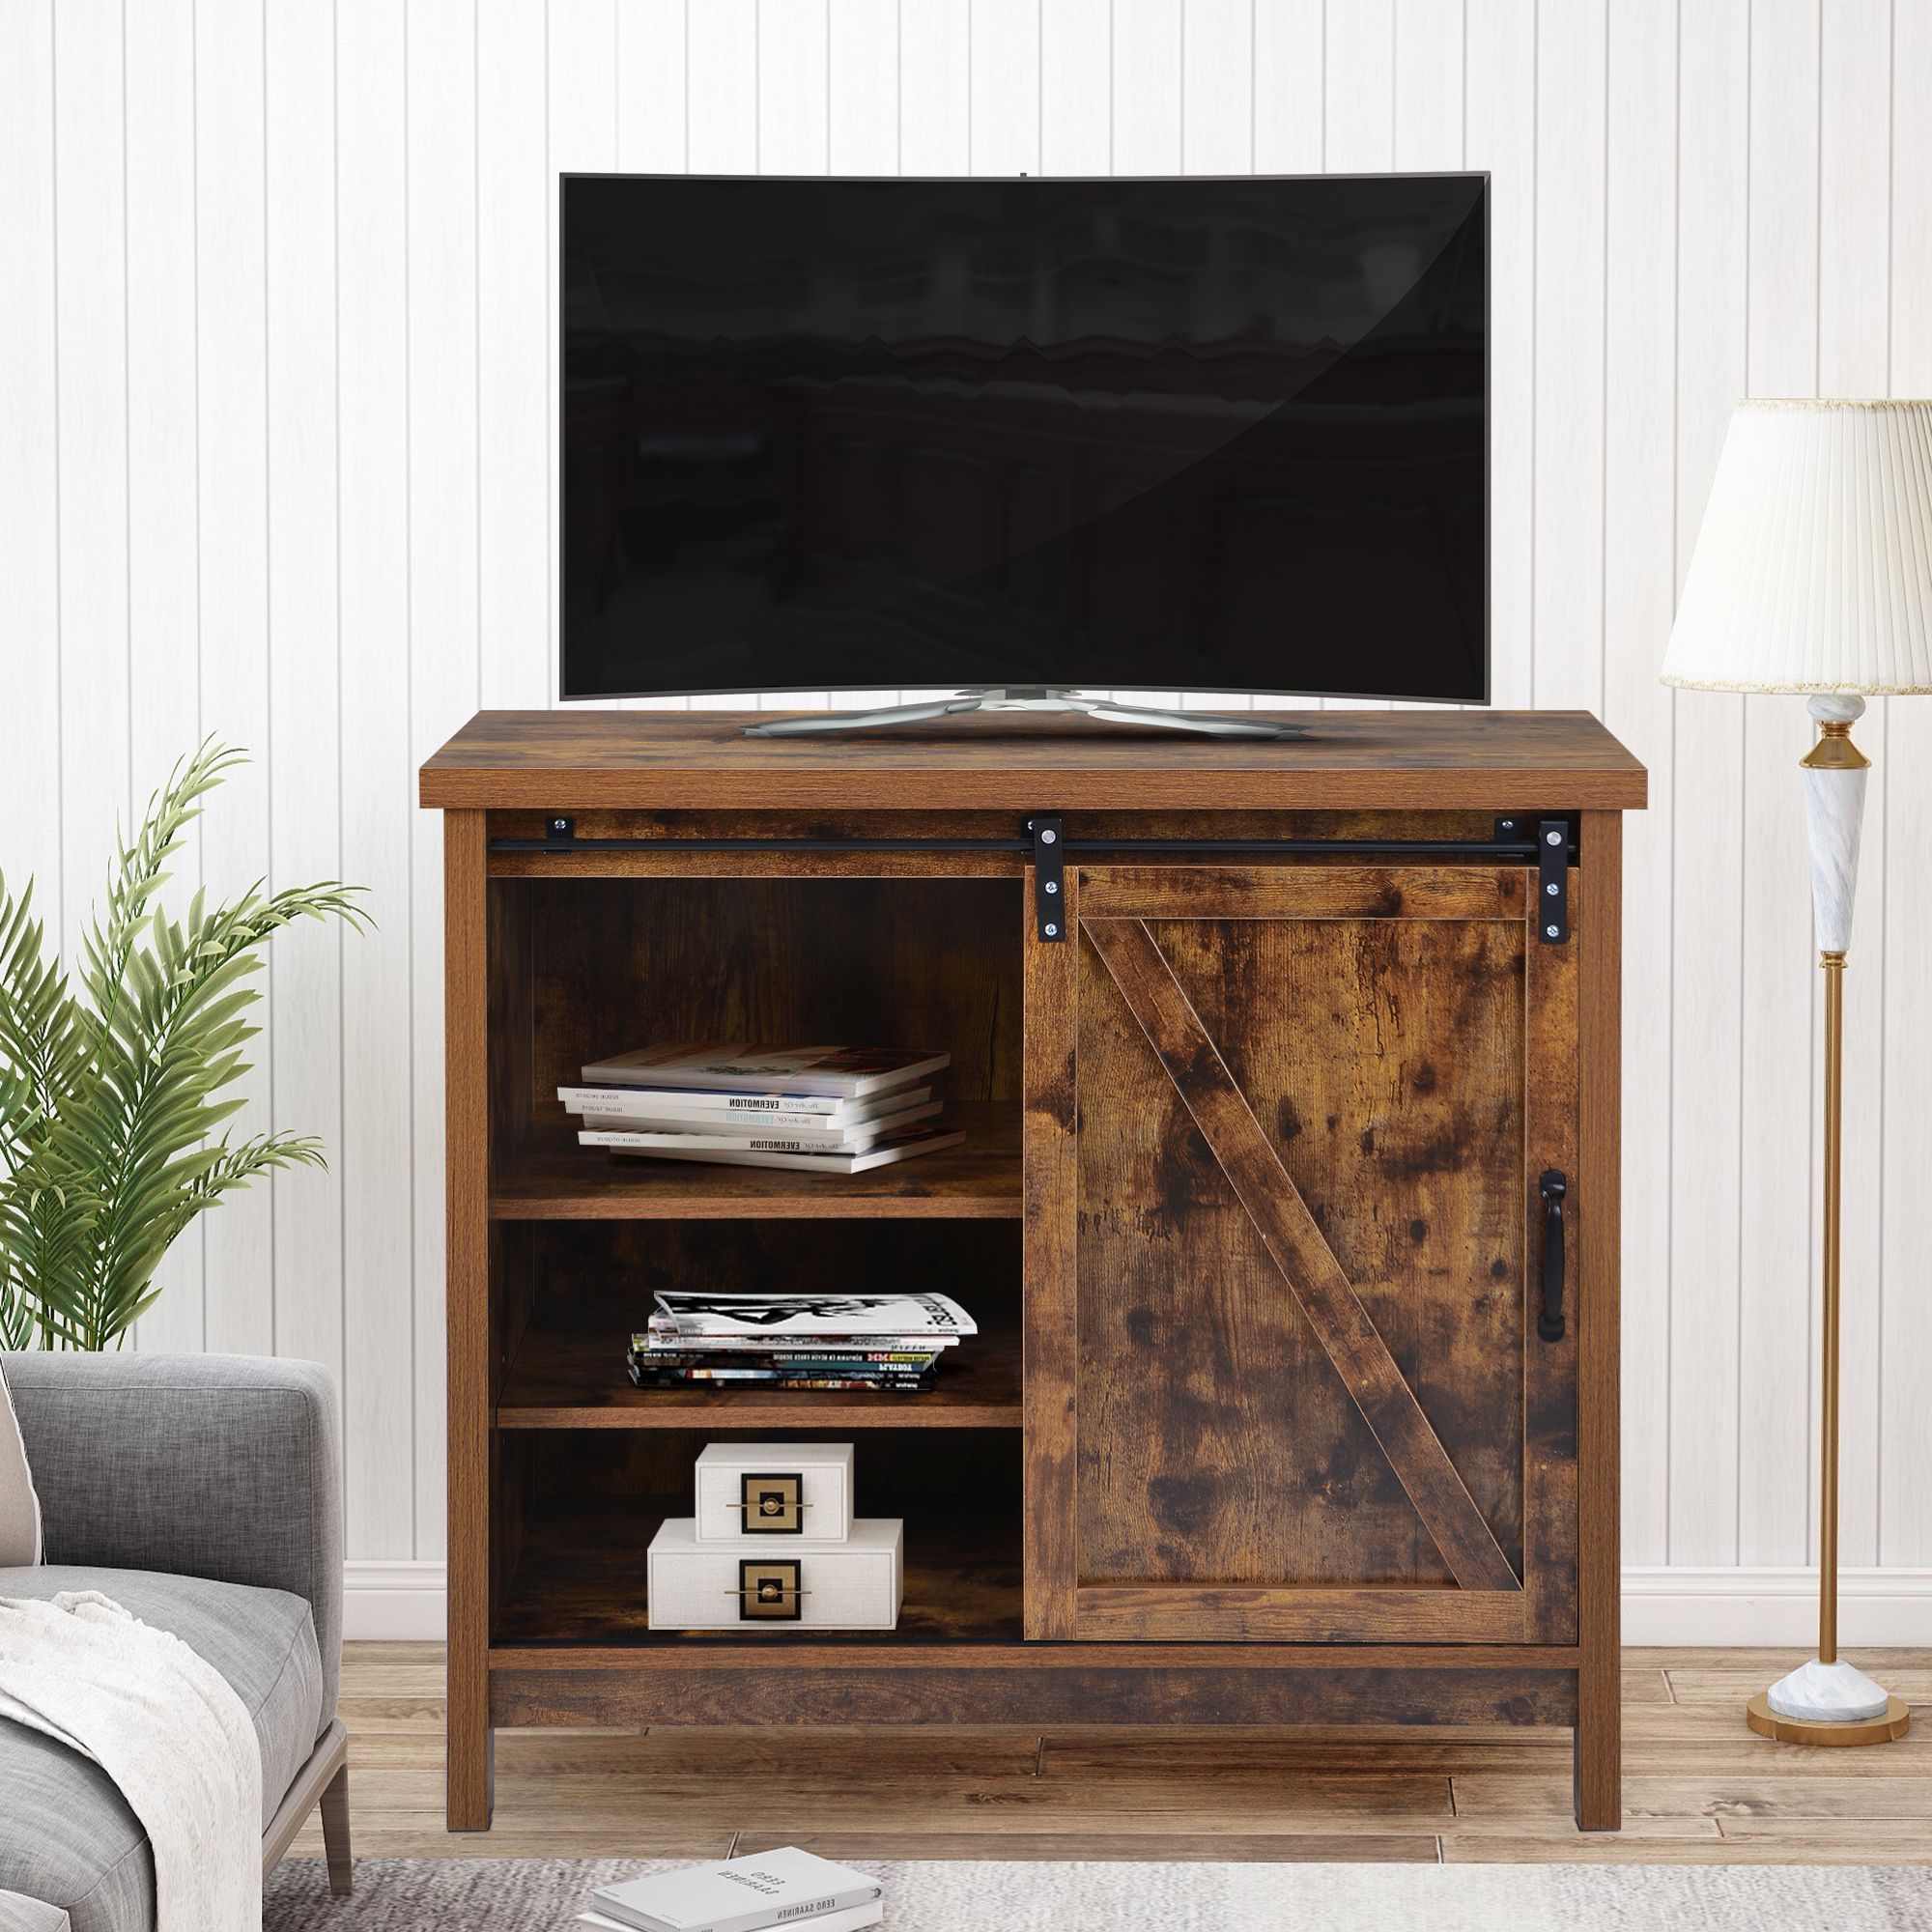 Modern Farmhouse Tv Stand, 2020 New 35 Inch Television Throughout Modern Sliding Door Tv Stands (Gallery 5 of 20)